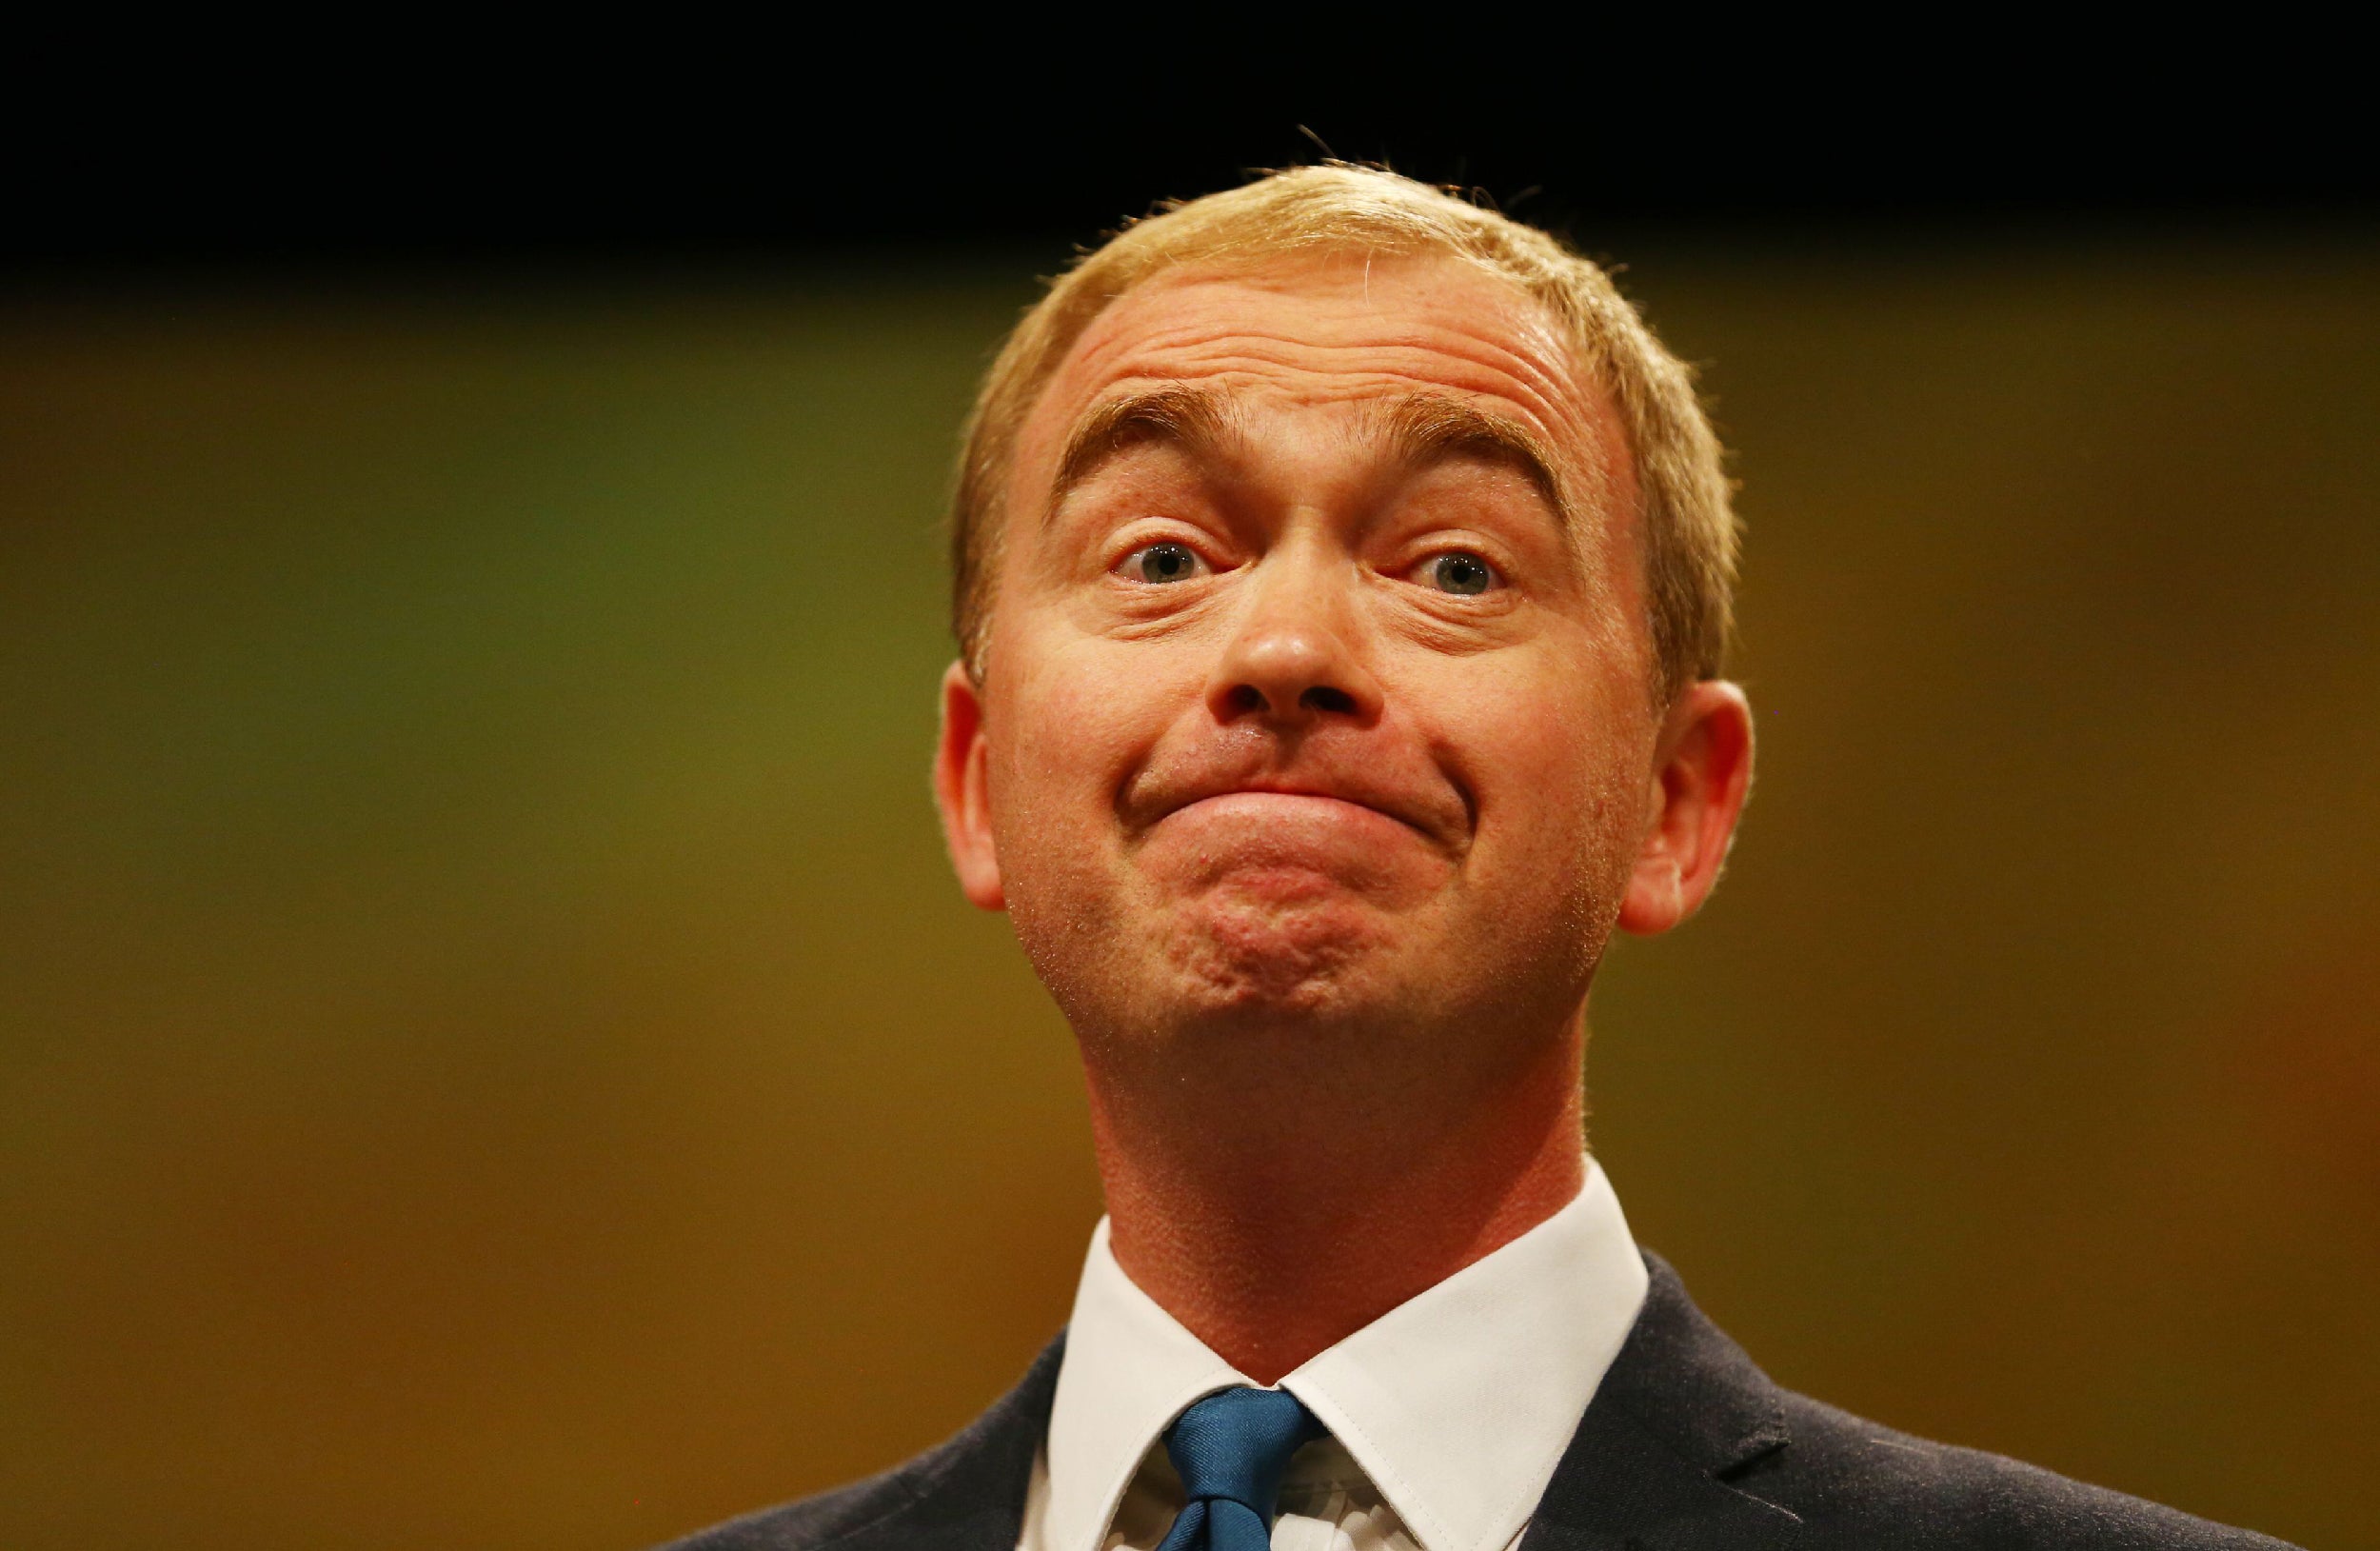 Mr Farron also described Labour's position on Article 50 as 'shambolic'